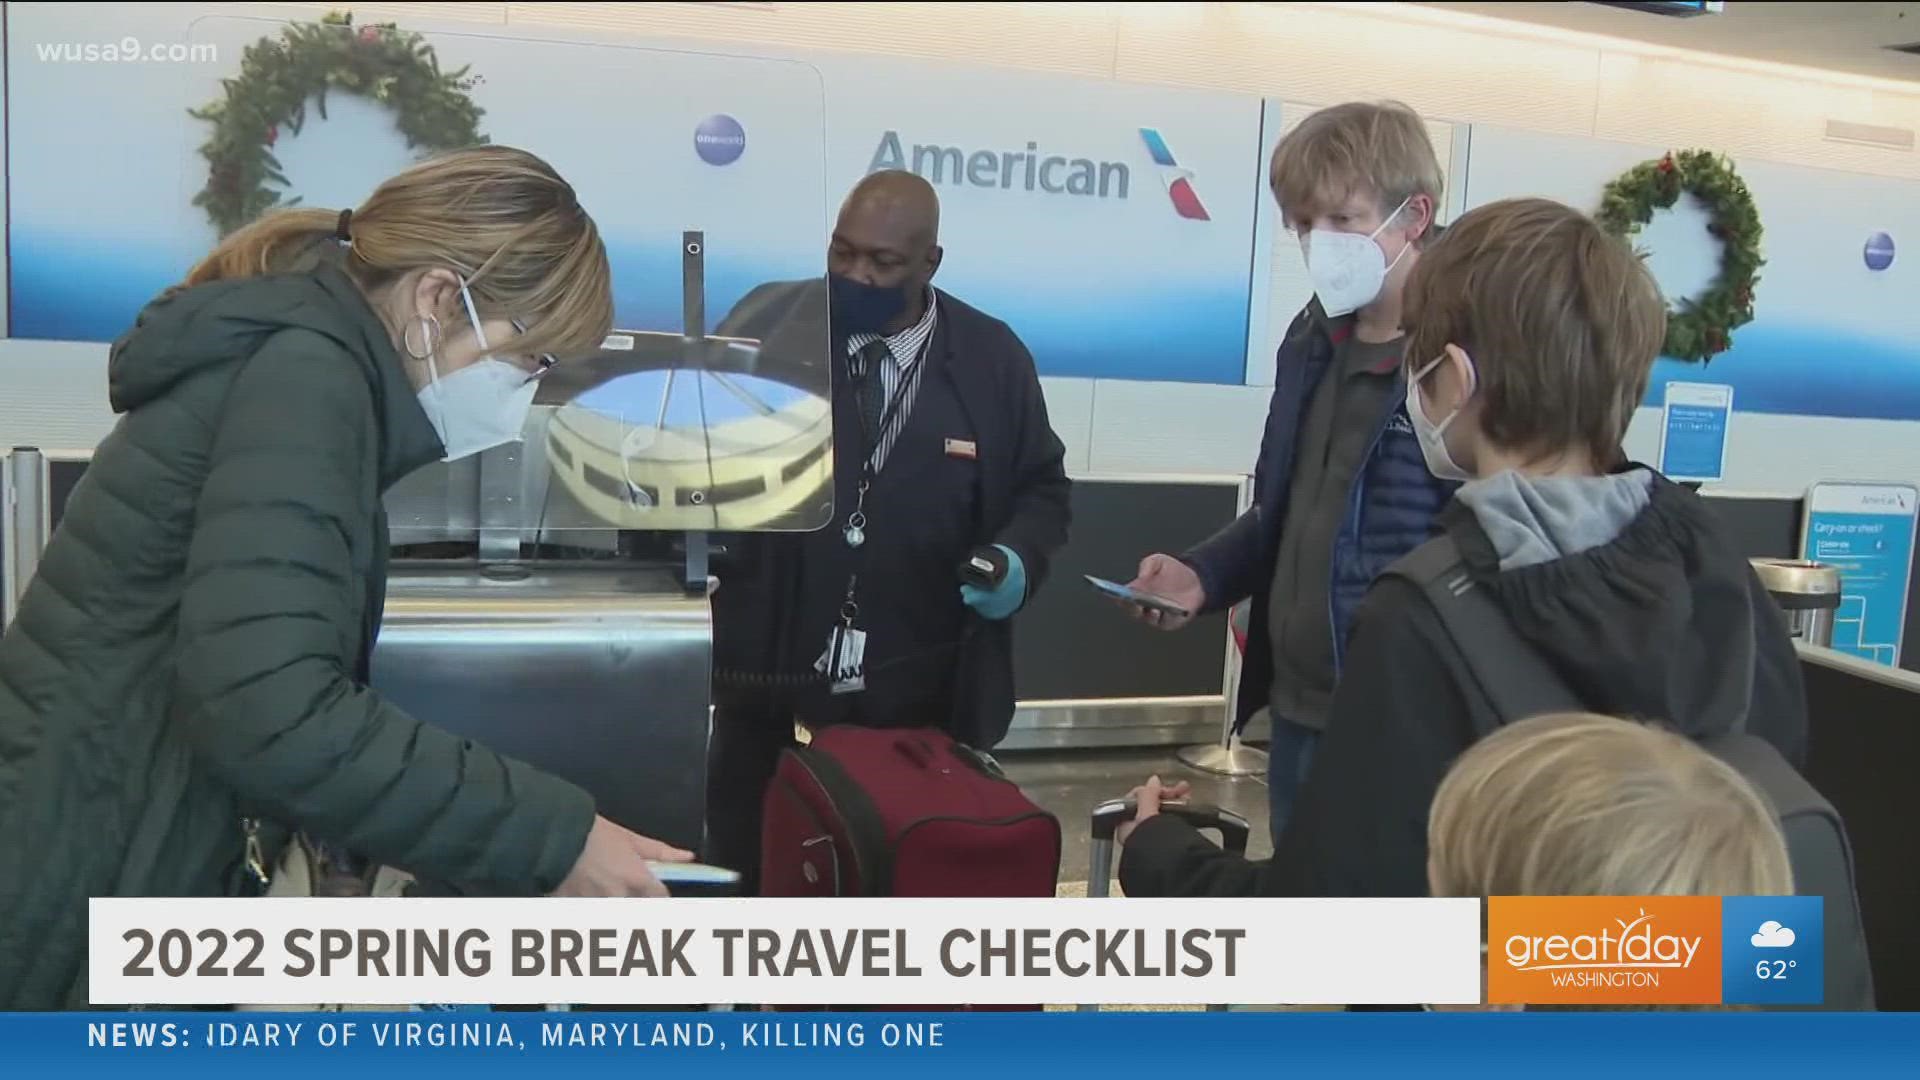 ER Physician Dr. Gene Delaune explains the importance of travel insurance and other tips to travel safely an be prepared for any situation.